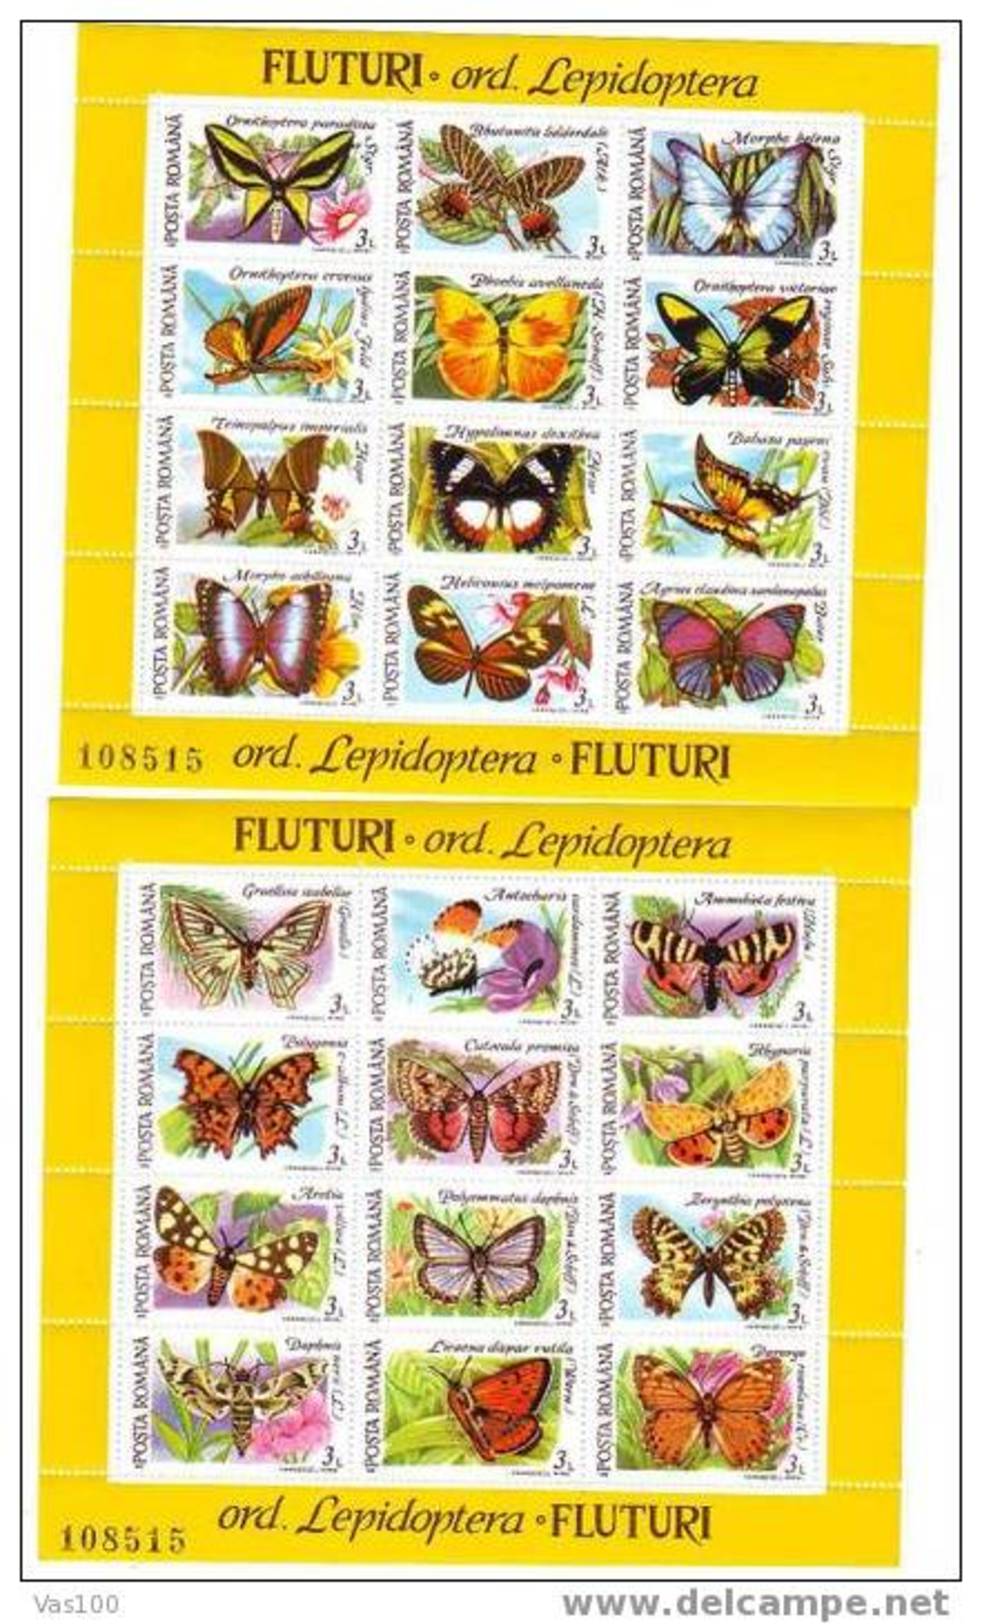 ROMANIA 1991 PAPILLONS/BUTTERFLYS,MNH,MI 267-268,2X SS,24 STAMPS - Hojas Completas